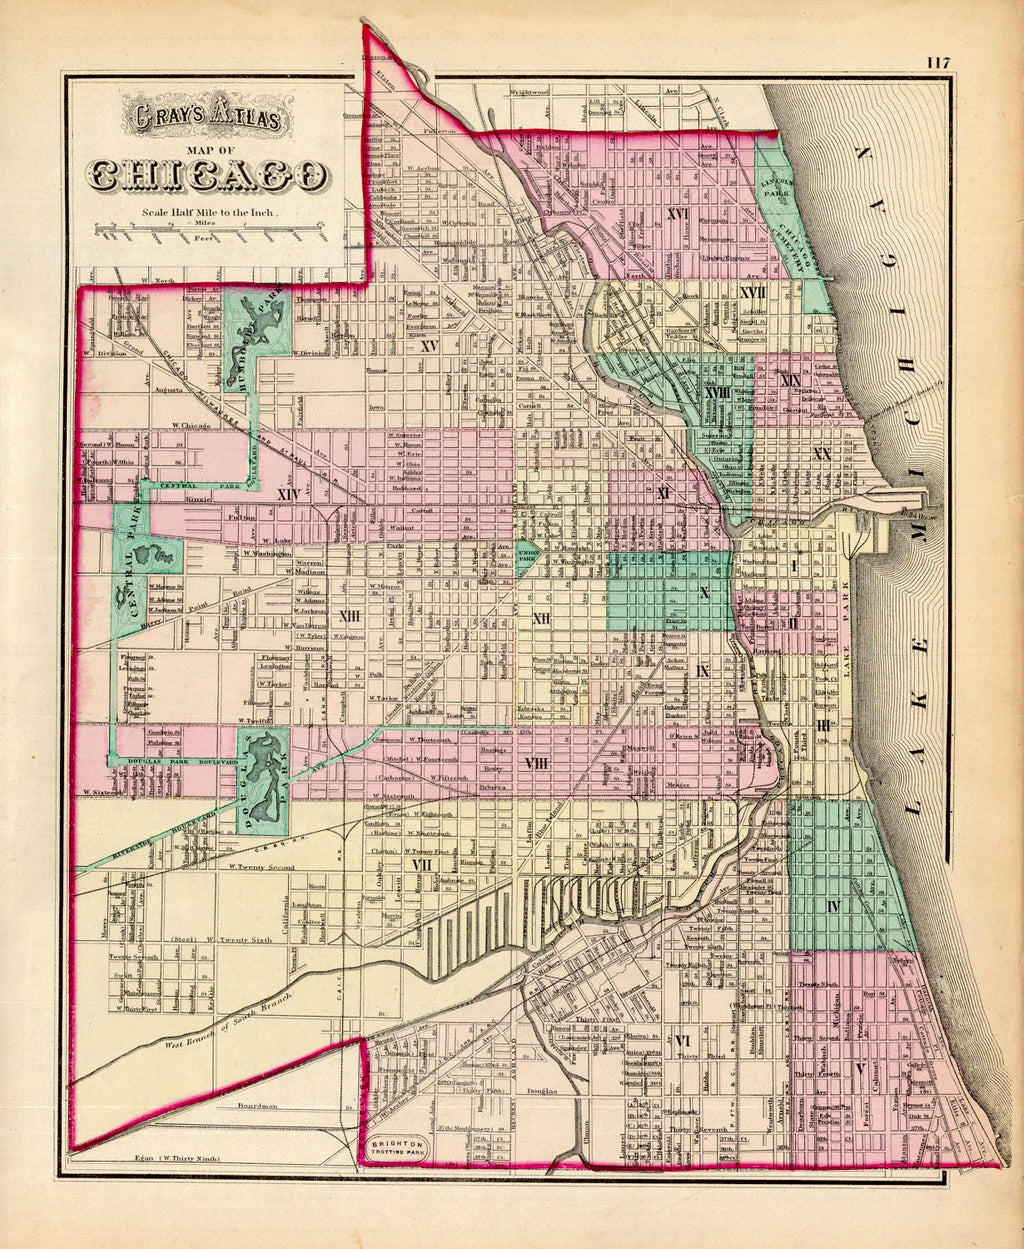 Map of Chicago Gray, 1874 It had recovered from a great fire in 1871 and it would face another smaller fire in this same year of 1874. With shoreline expanded by the ruble of the great conflagration, the city continues to grow with its trademark tenacious endurance. Blocks that had been levelled are again defined, and the green belt of parks and boulevards begin to ring the entire town. Condition is very good. Image size is approximately 15.75 x 13 (inches)  